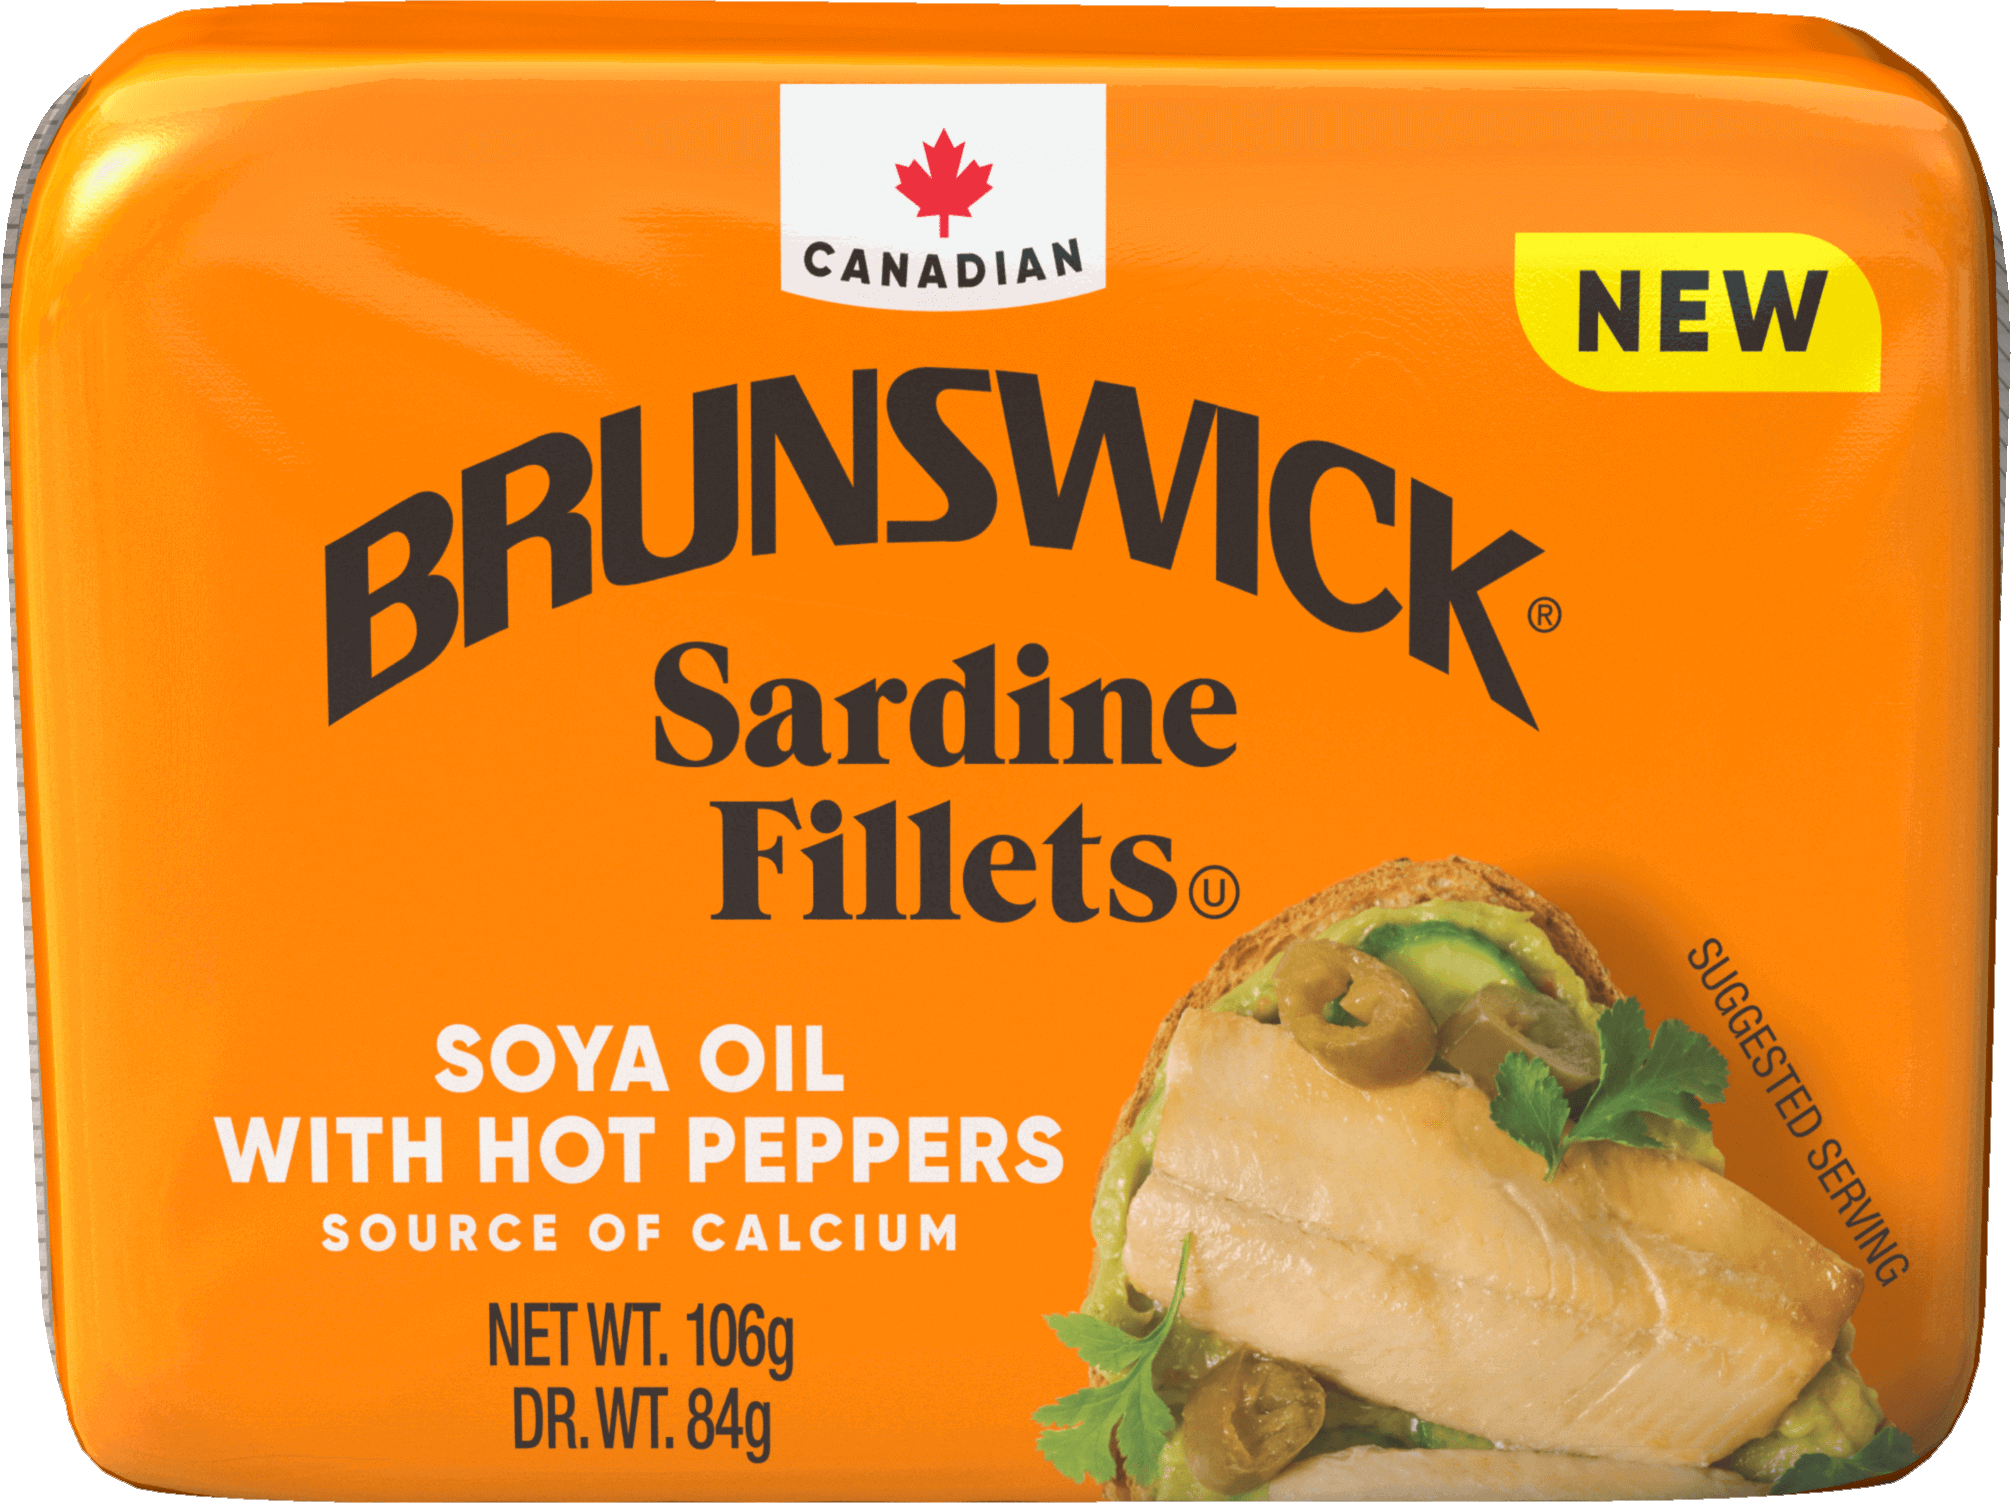 Brunswick<sup>®</sup> Sardine Fillets- Soya Oil with Hot Peppers